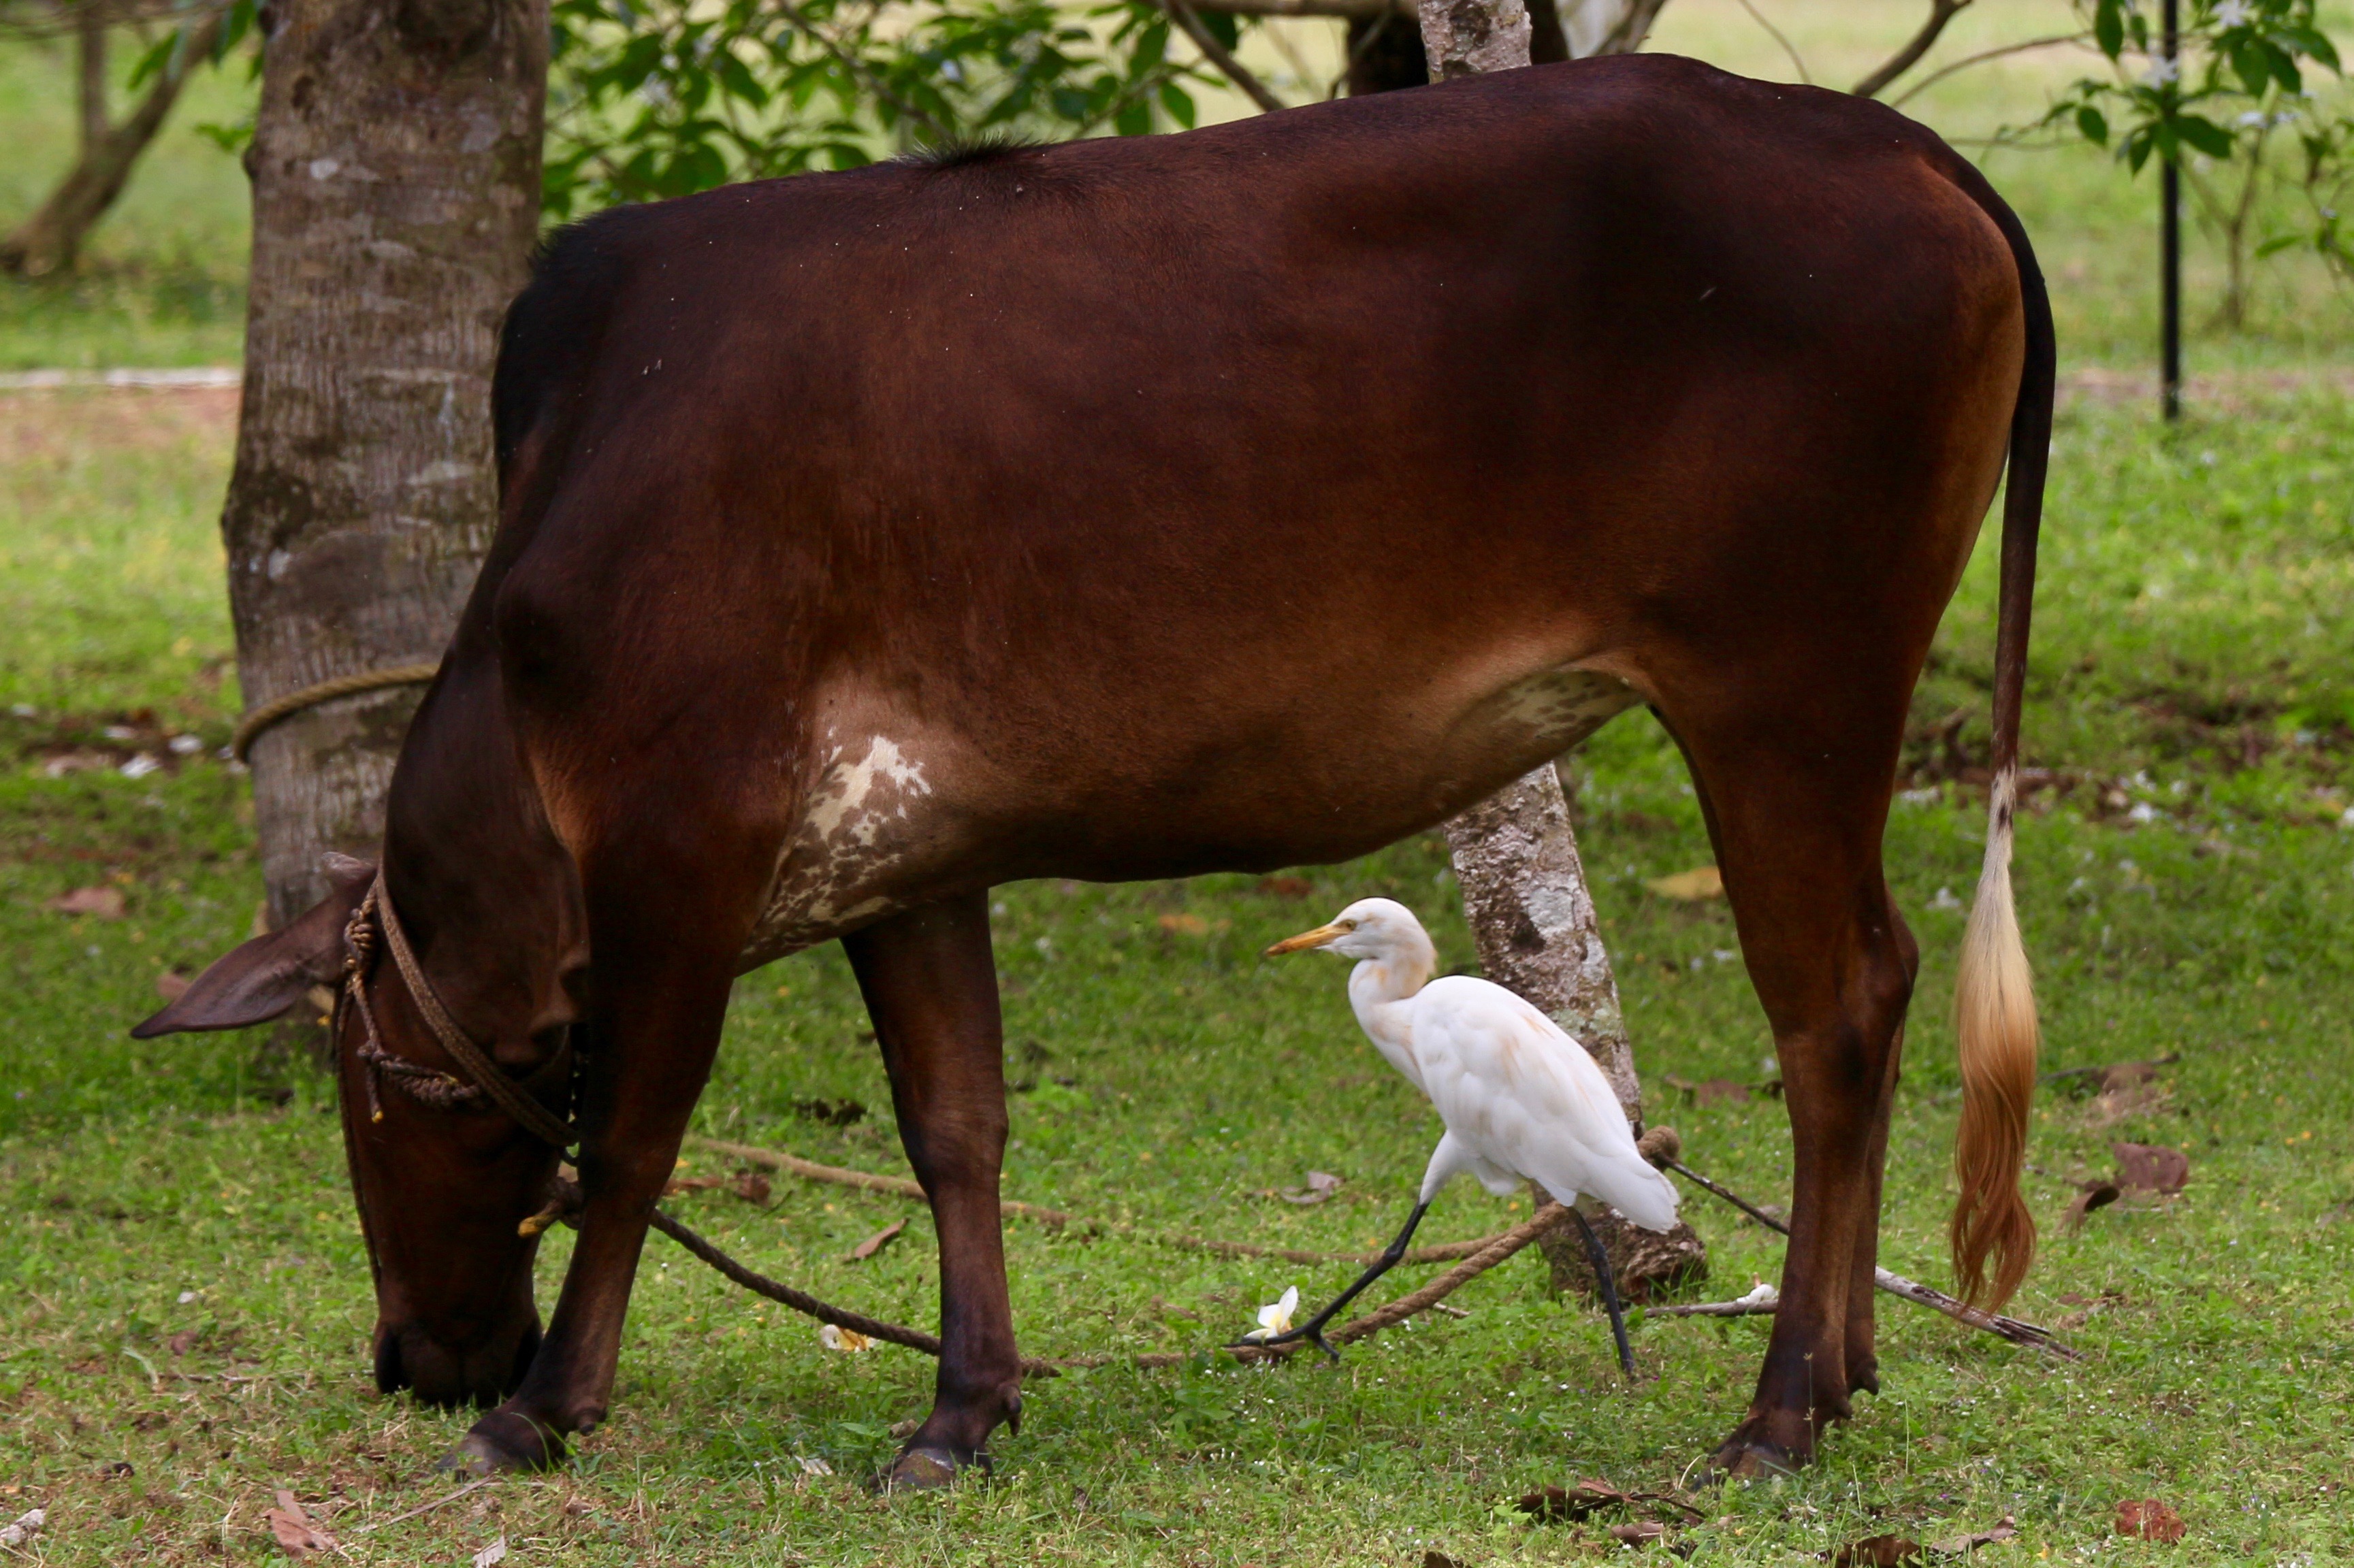 A brown cow takes up almost the entirety of the frame and a cattle egret walks at its feet. The cow has a rope around its neck tying it to a tree nearby and it is grazing. The cattle egret is a medium sized bird with black legs, mostly white feathers that are tinged slightly yellow in parts, and a yellow bill.
